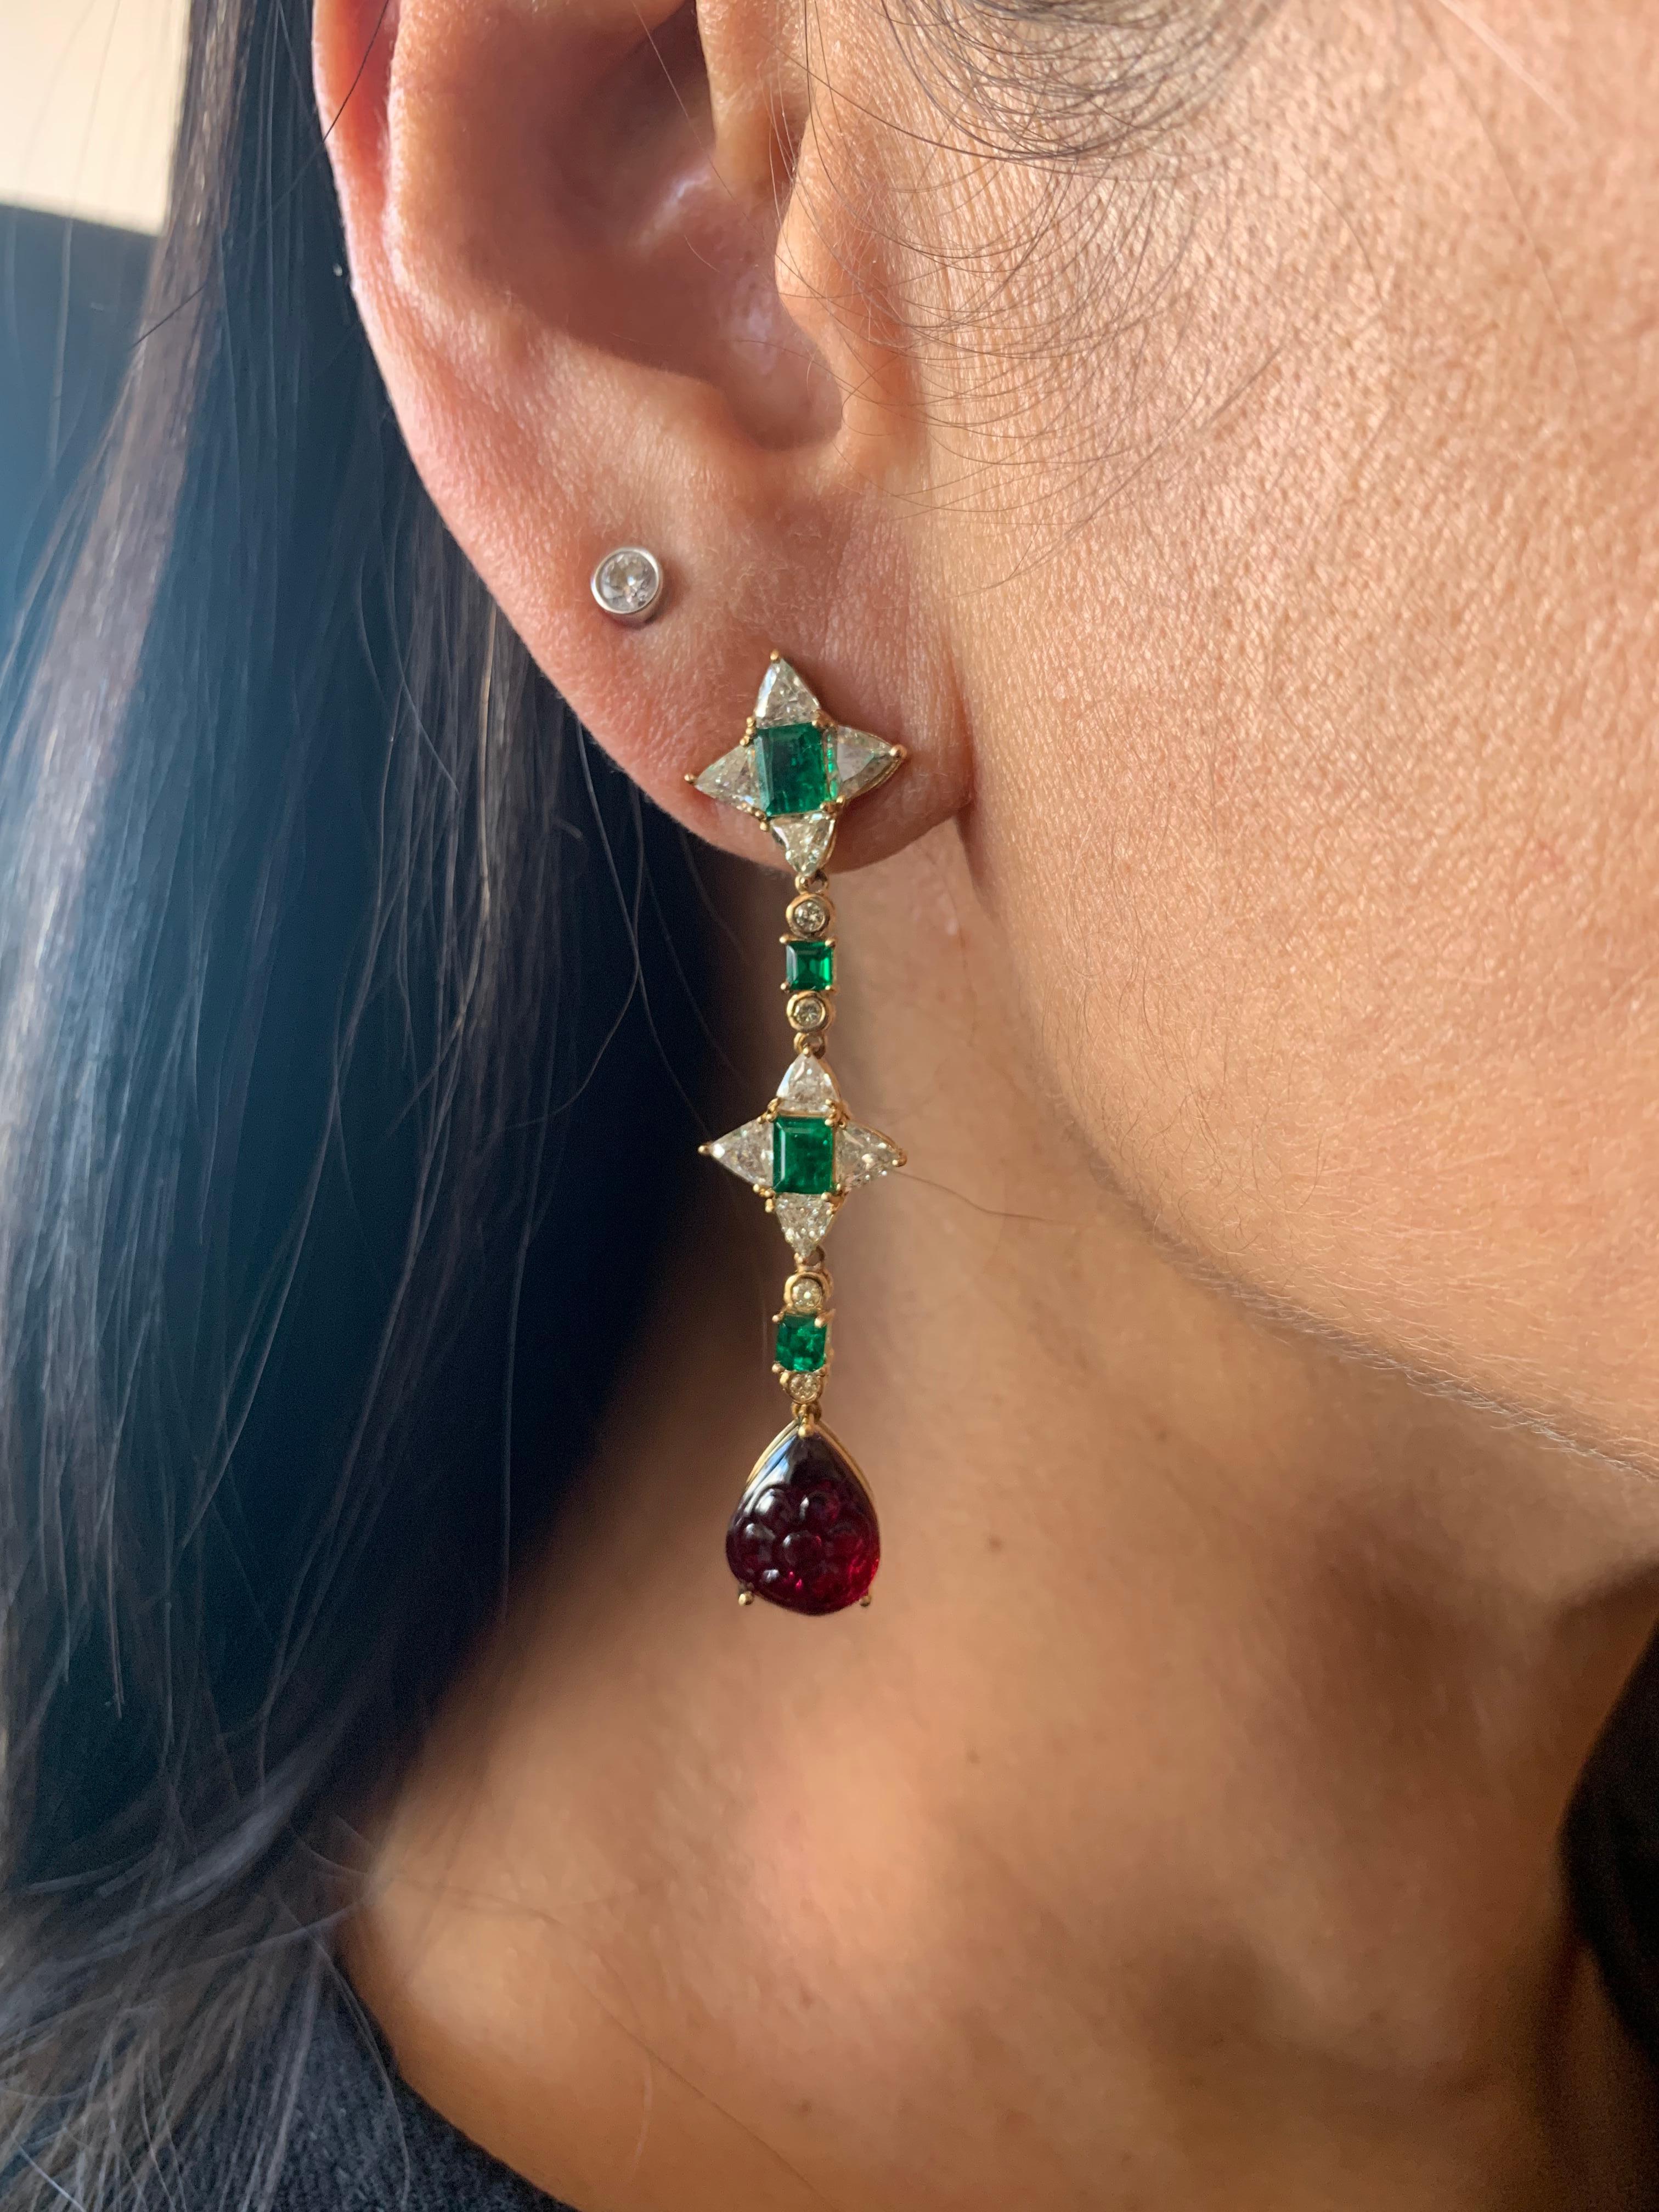 Elegant emerald and rubelite dangling earrings that are fun to wear. Crafted using a mix of unique cuts and shapes, these earrings are inspired by art deco and mughal elements. The pop of color with a trendy design makes these an eye-catching pair